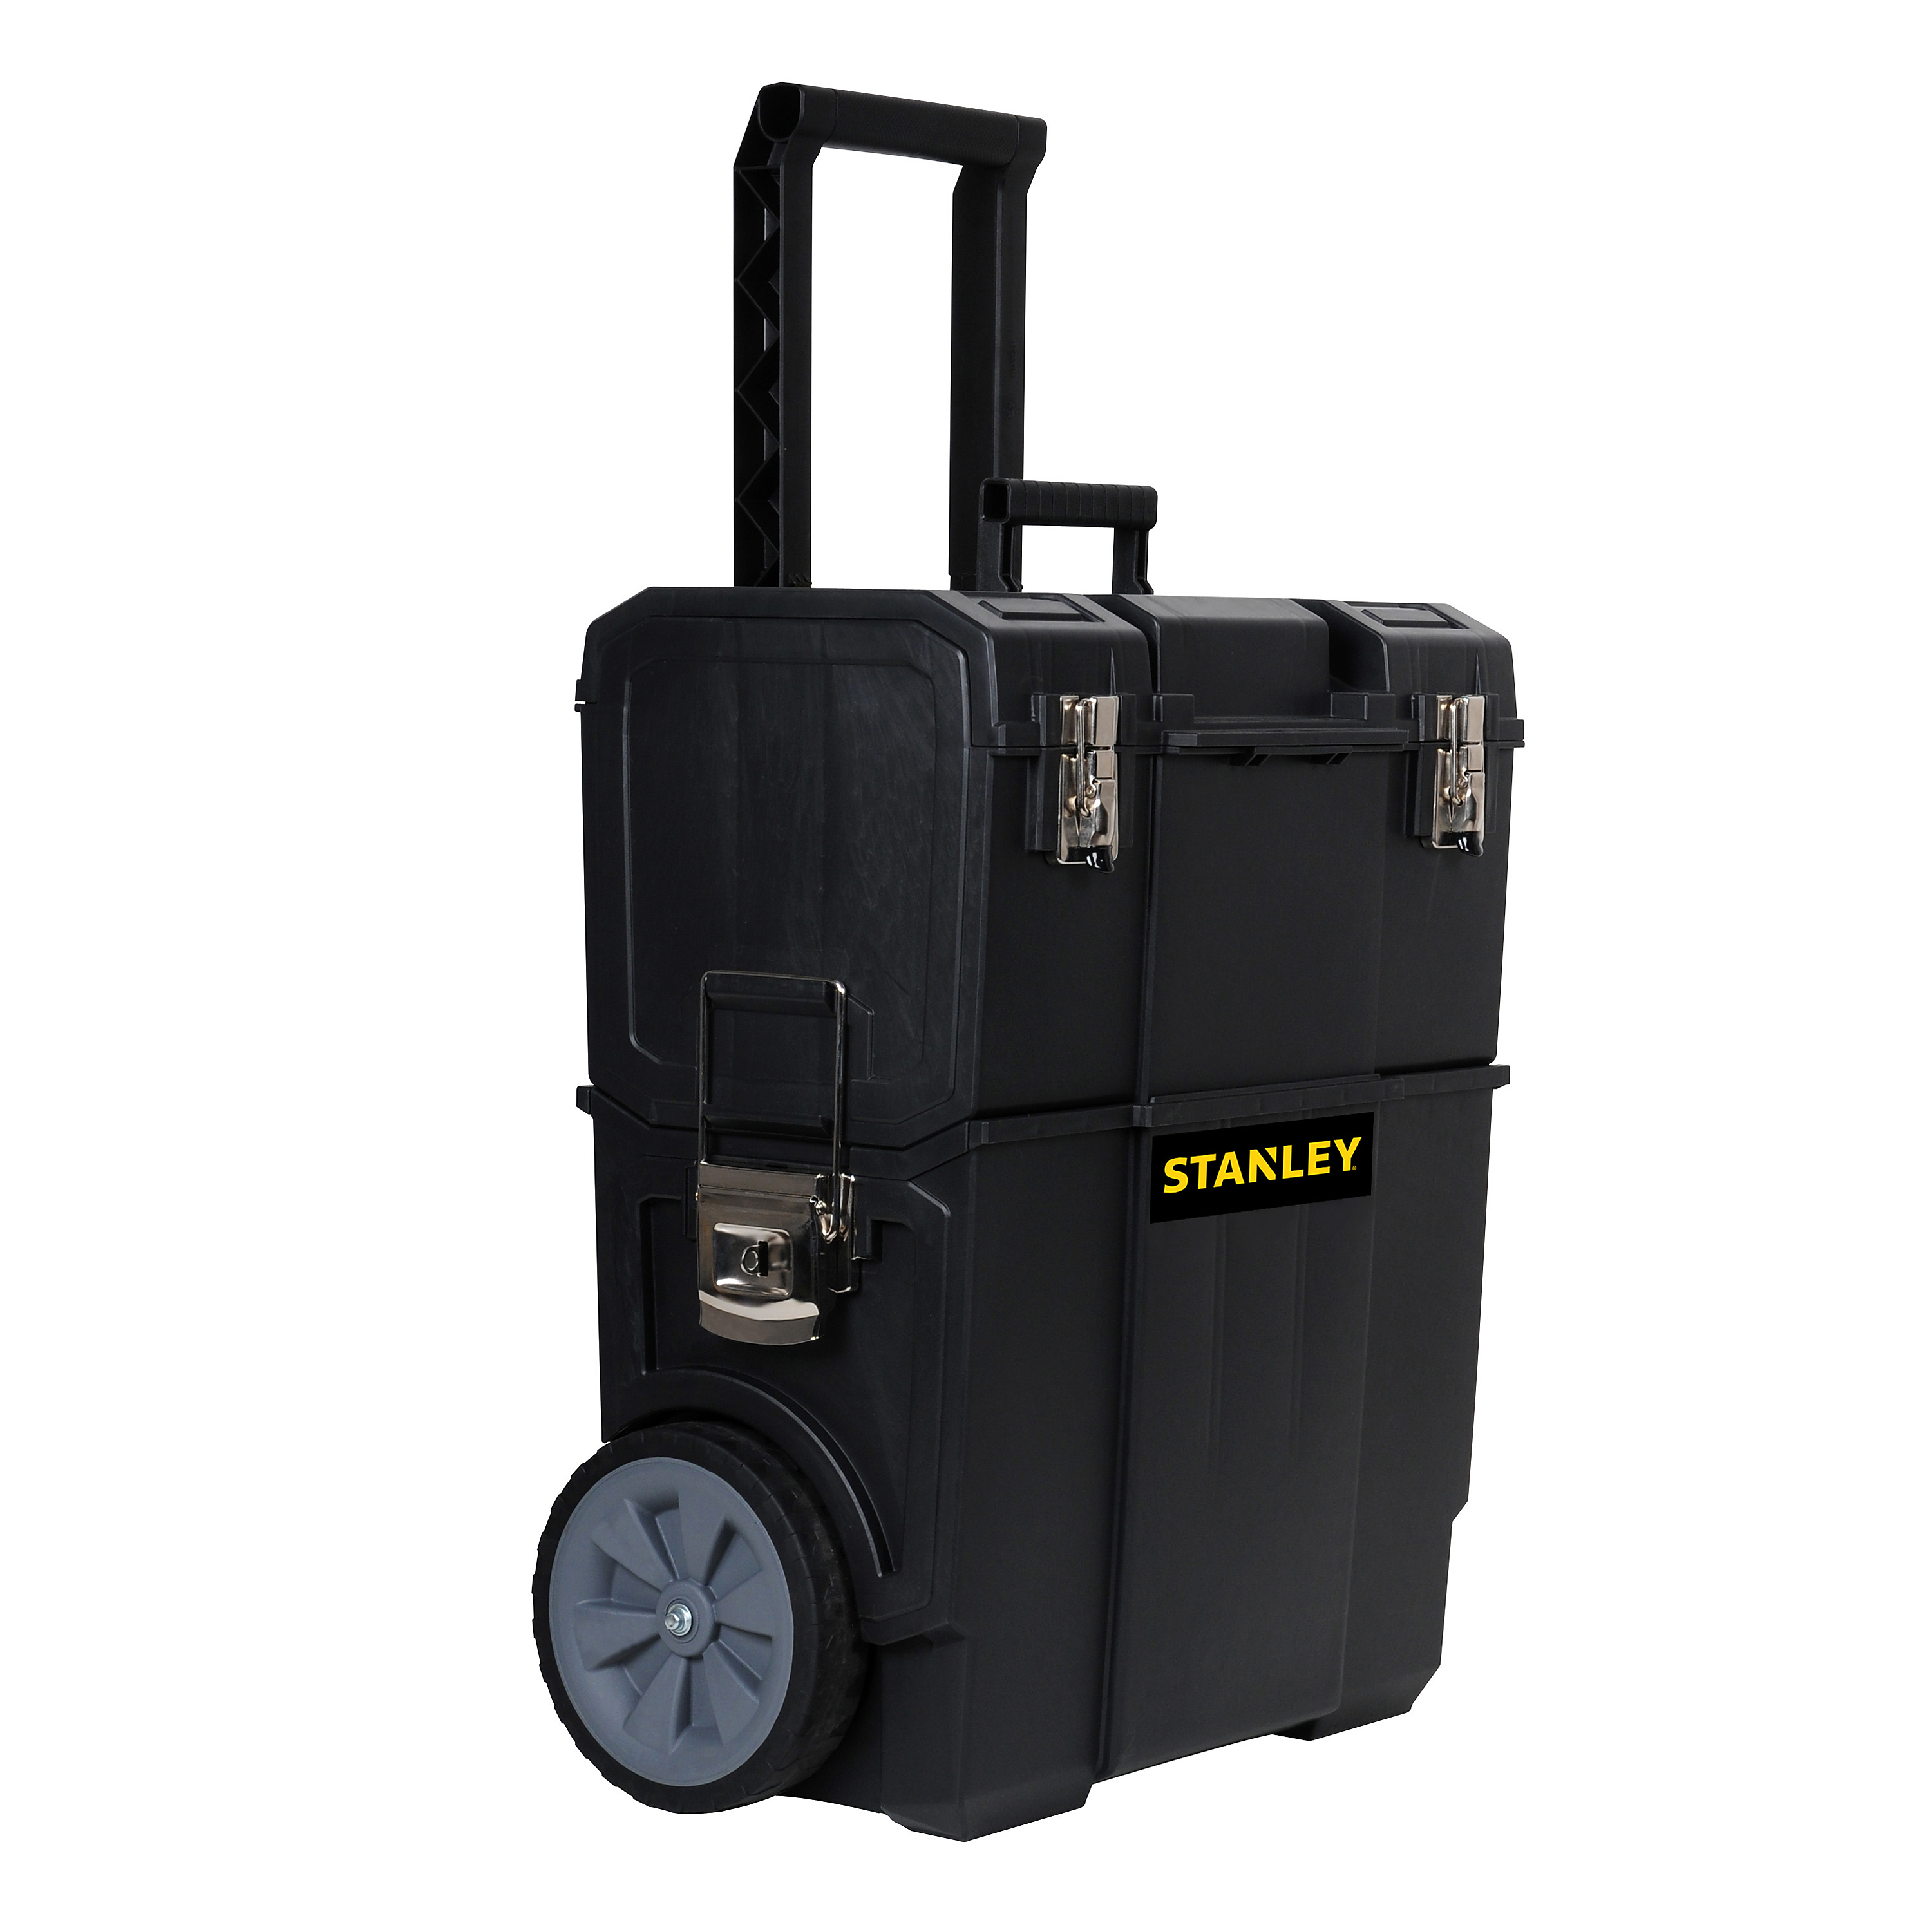 STANLEY STST18612W 2-IN-1 Mobile Work Center Plus Flat Top - image 1 of 4